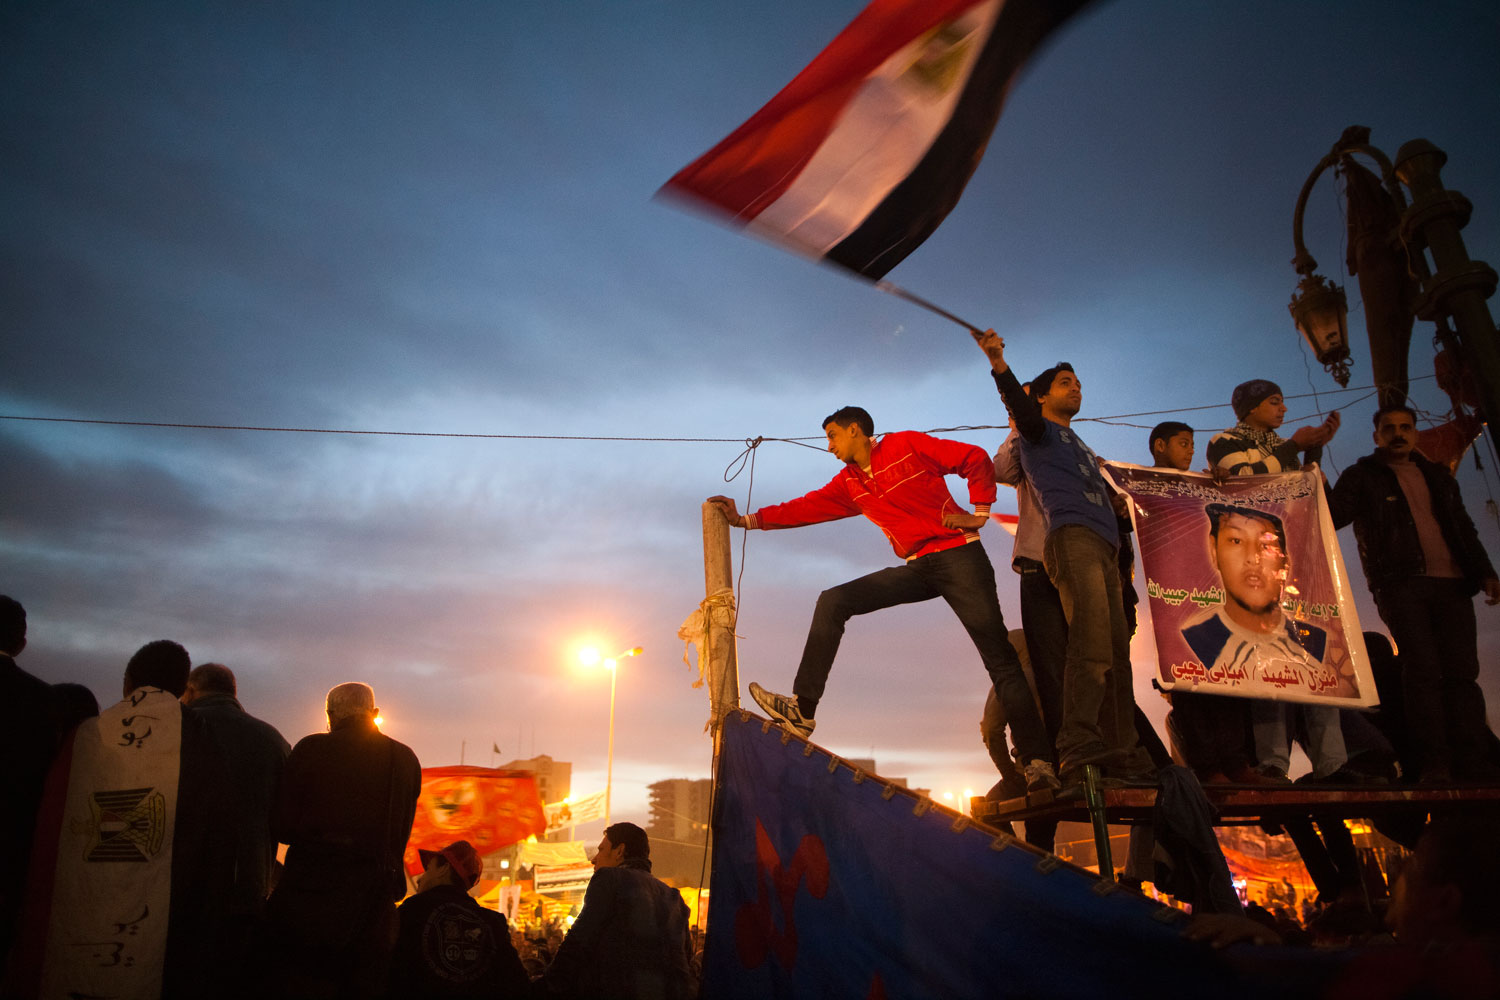 Egyptian youths watch an assembled crowd while holding a flag and a martyr poster in Tahrir Square.